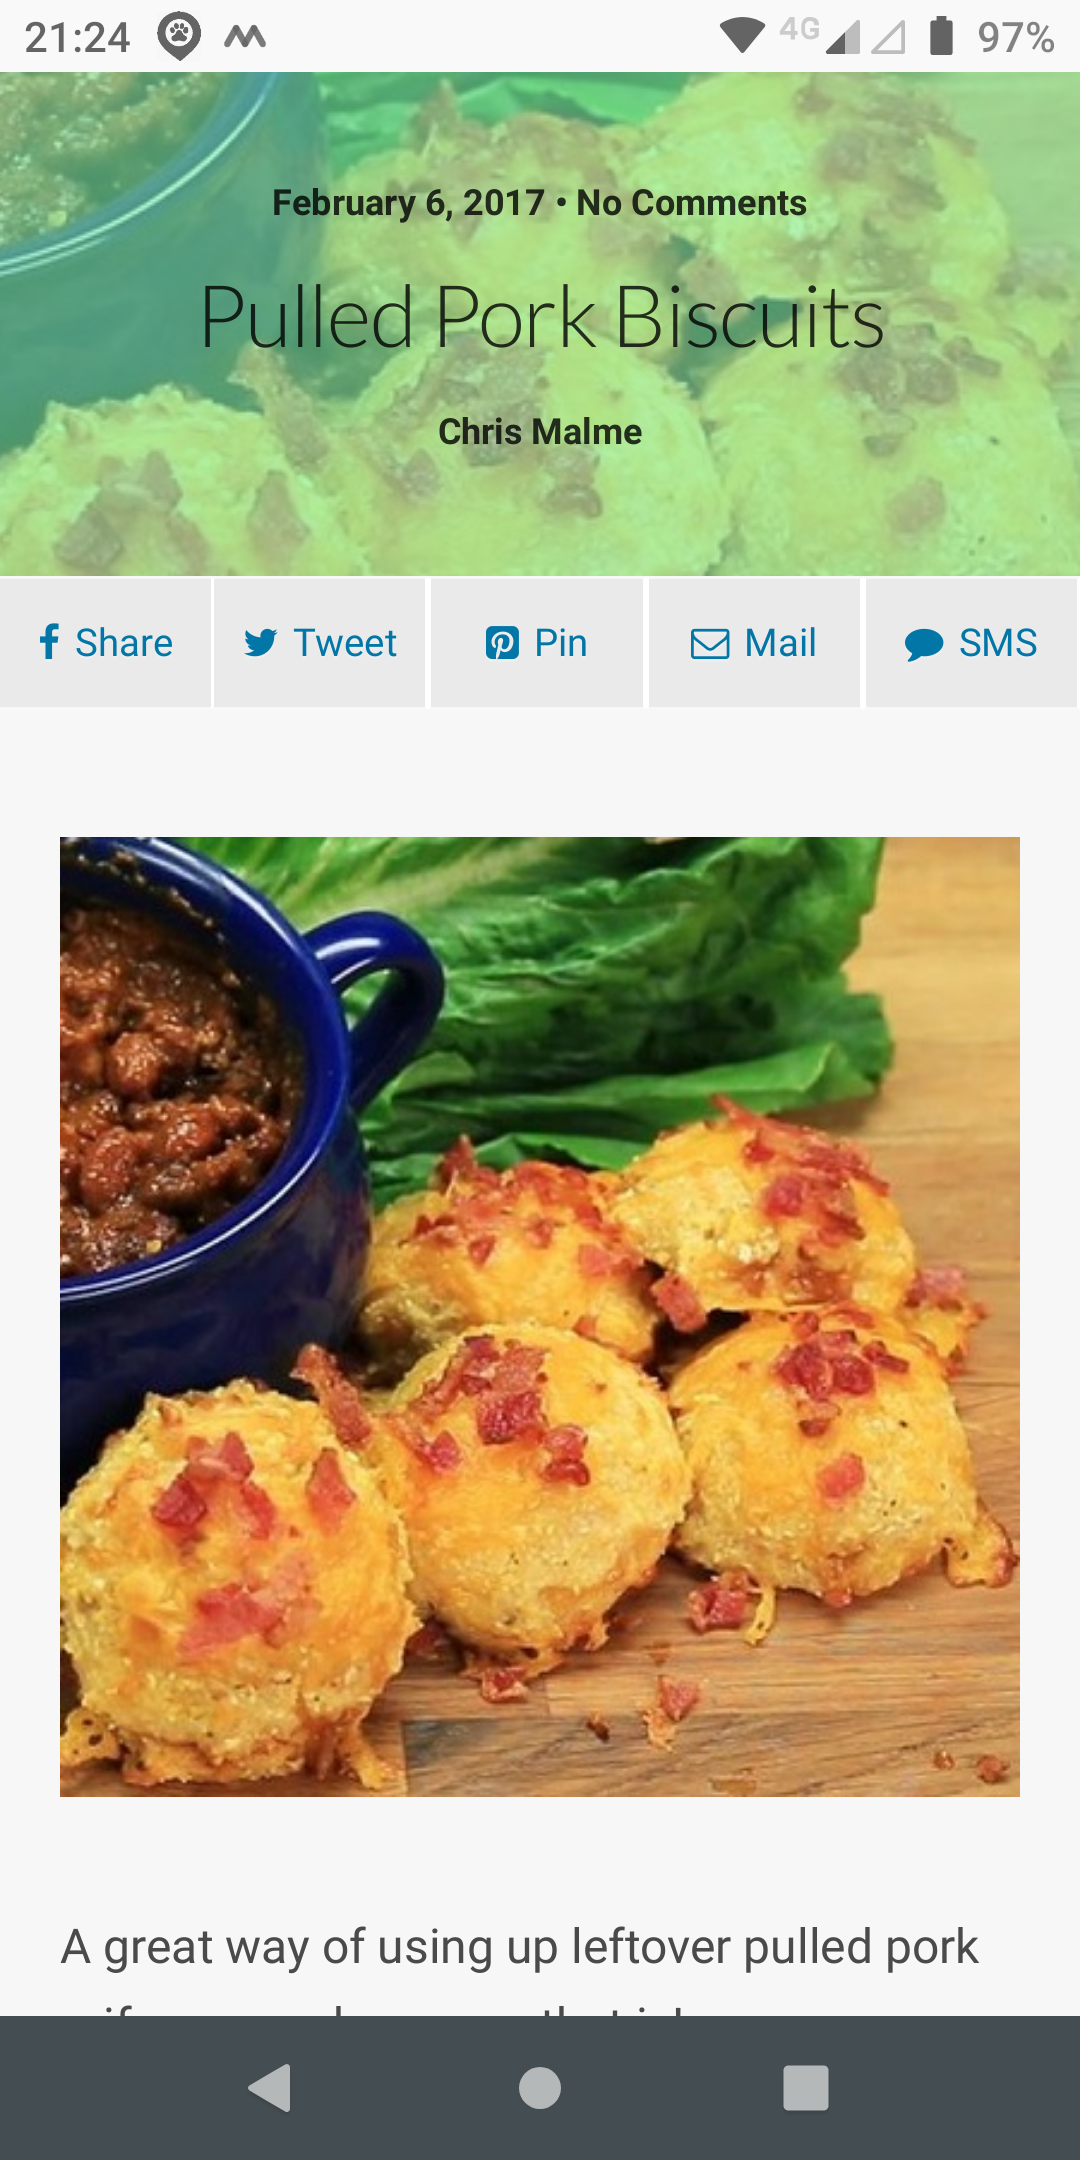 The header for a recipe in mobile mode